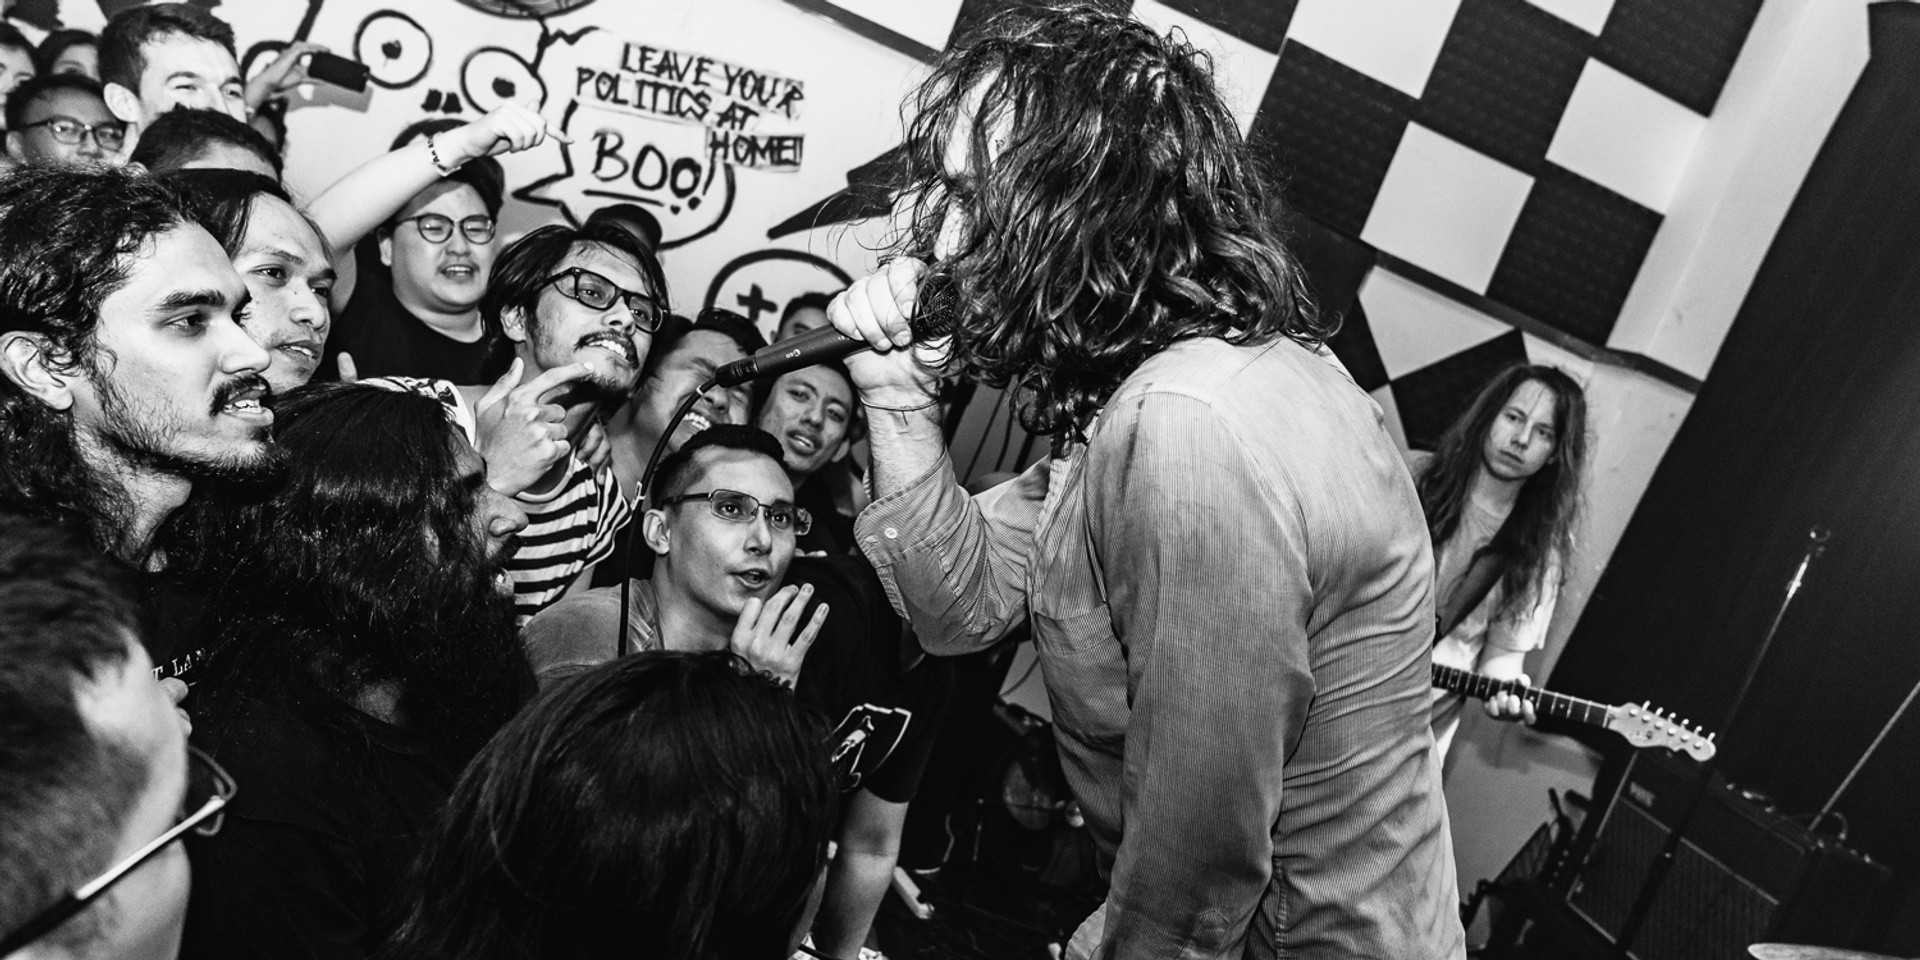 Pianos Become The Teeth treat fans to almighty chaos in Singapore – photo gallery 